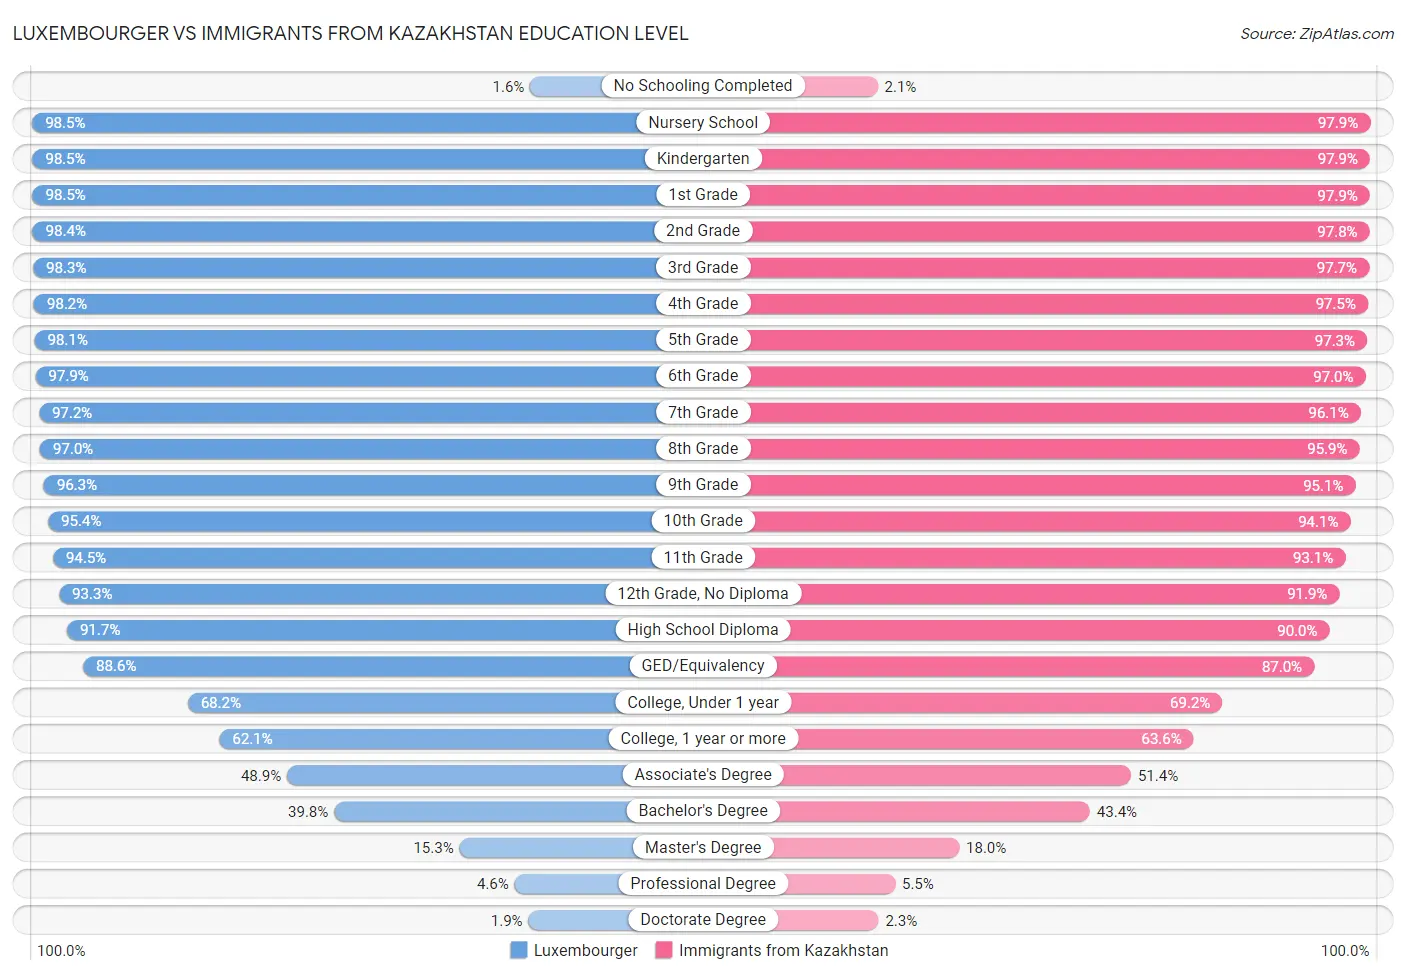 Luxembourger vs Immigrants from Kazakhstan Education Level